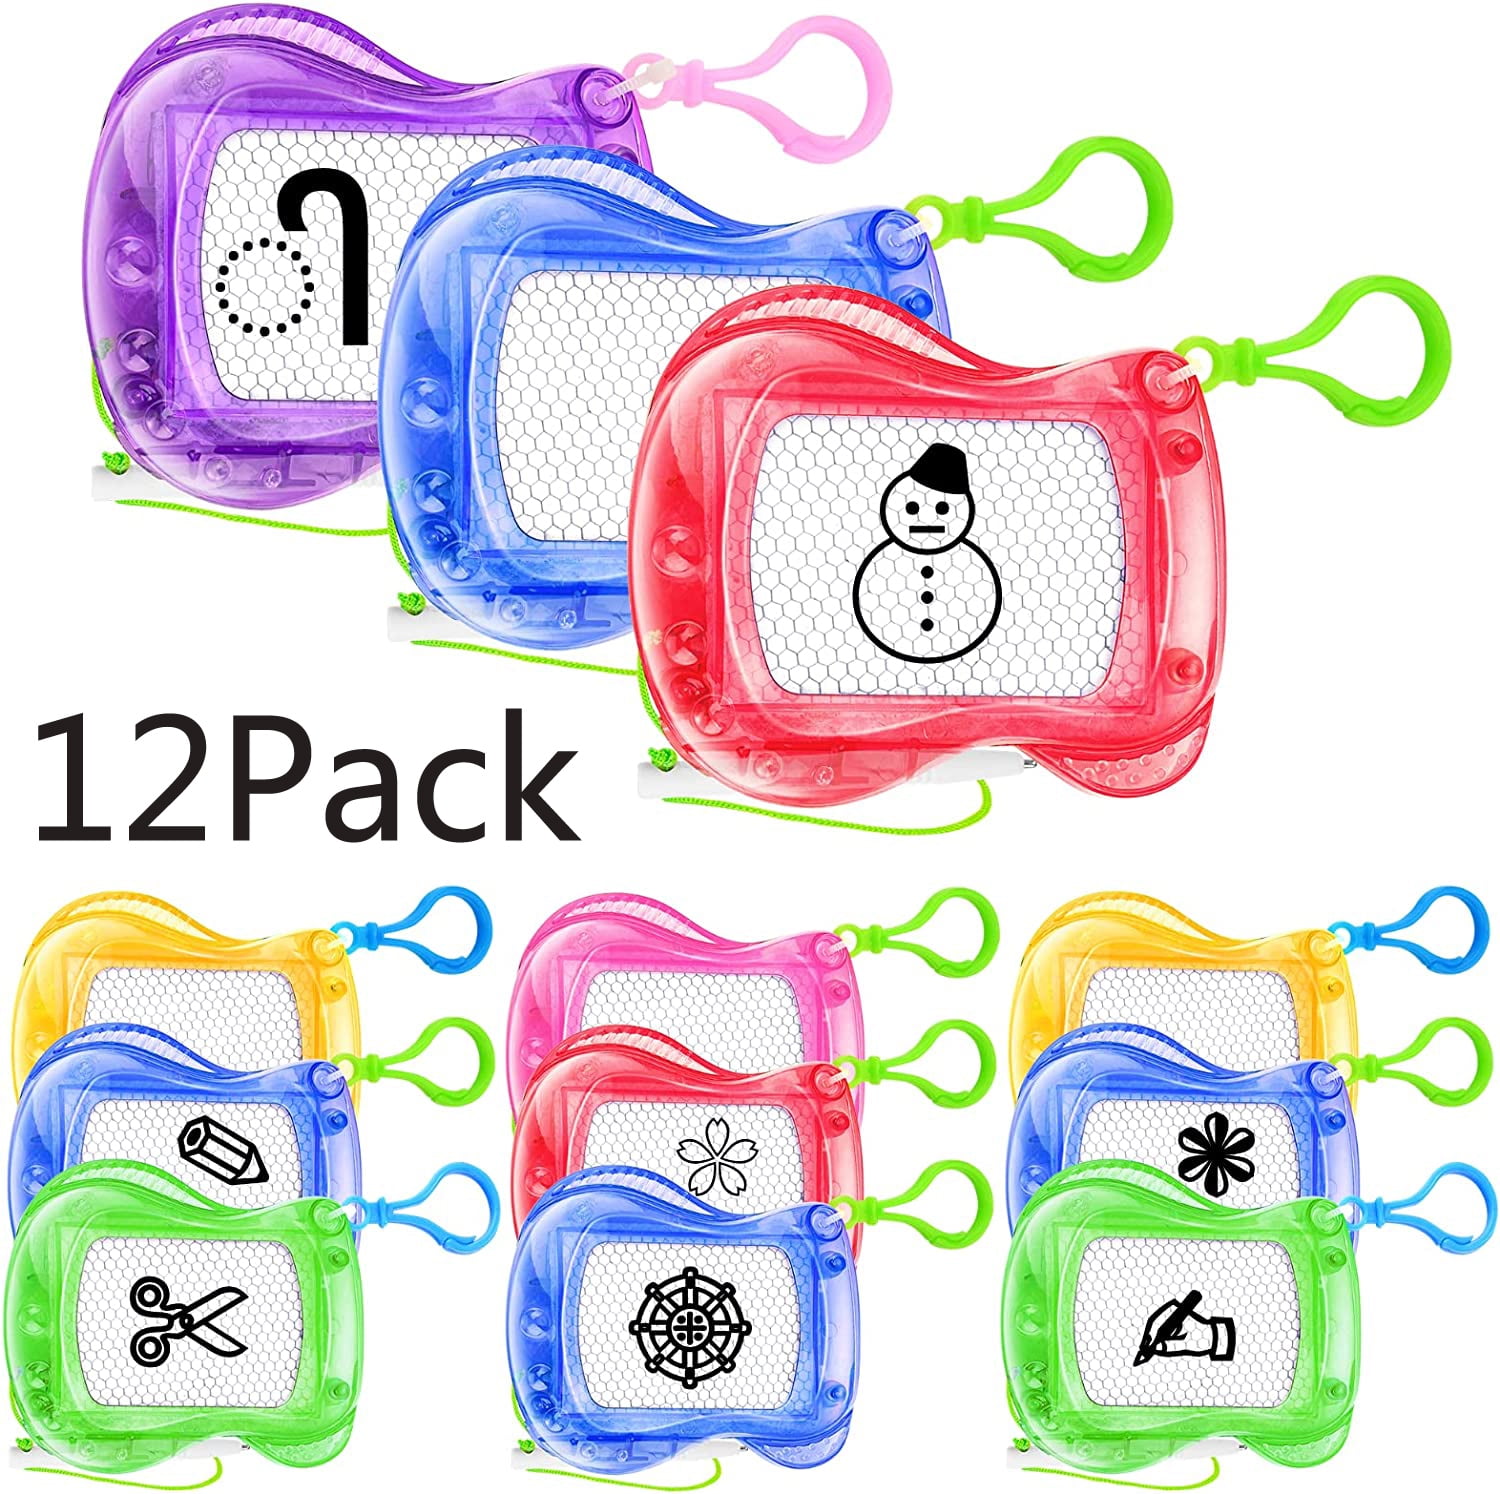 36 Pcs Mini Magnetic Drawing Board for Kids,Erasable Sketch and Painting Pad  with Backpack Keychain Clip,Mini Doodle Board for Birthday Party Favors  Classroom Supply Goodie Bag Stuffer 